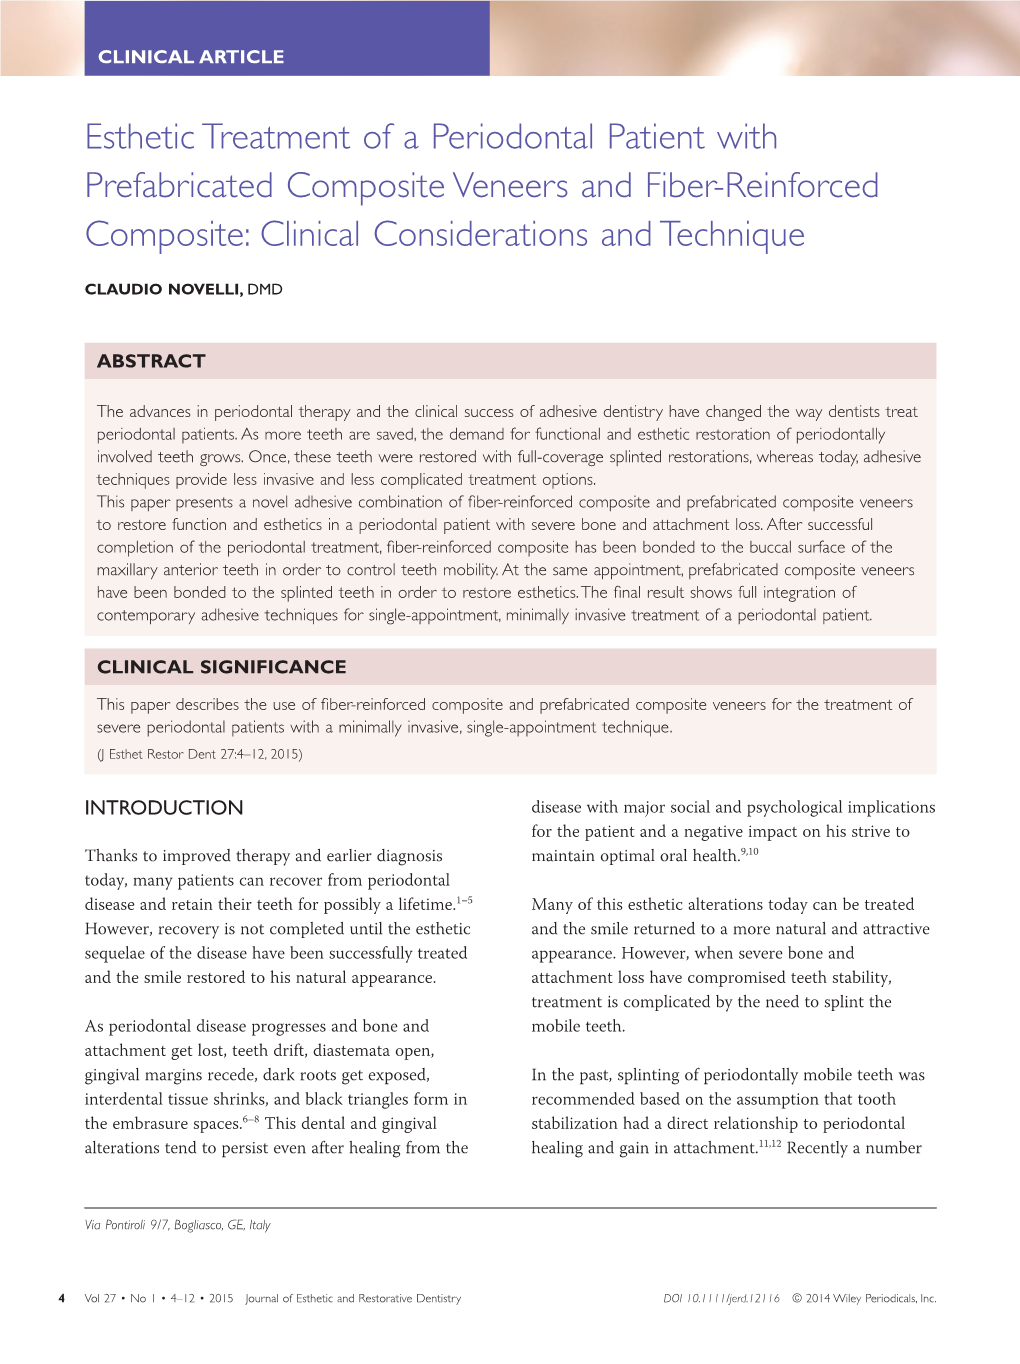 Esthetic Treatment of a Periodontal Patient with Prefabricated Composite Veneers and Fiber-Reinforced Composite: Clinical Considerations and Technique